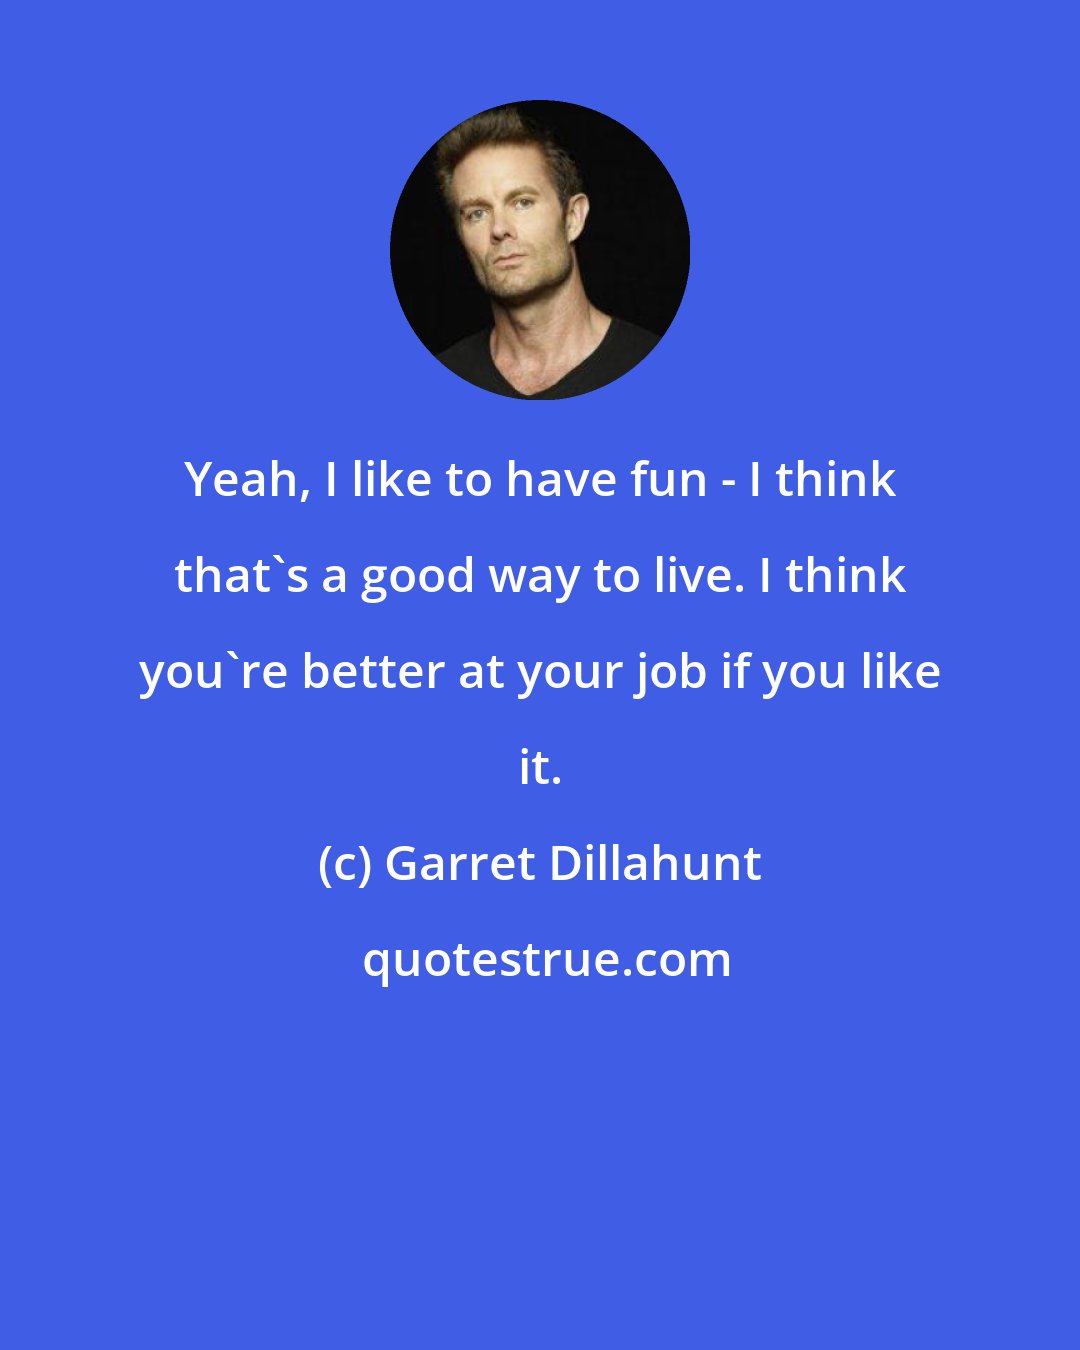 Garret Dillahunt: Yeah, I like to have fun - I think that's a good way to live. I think you're better at your job if you like it.